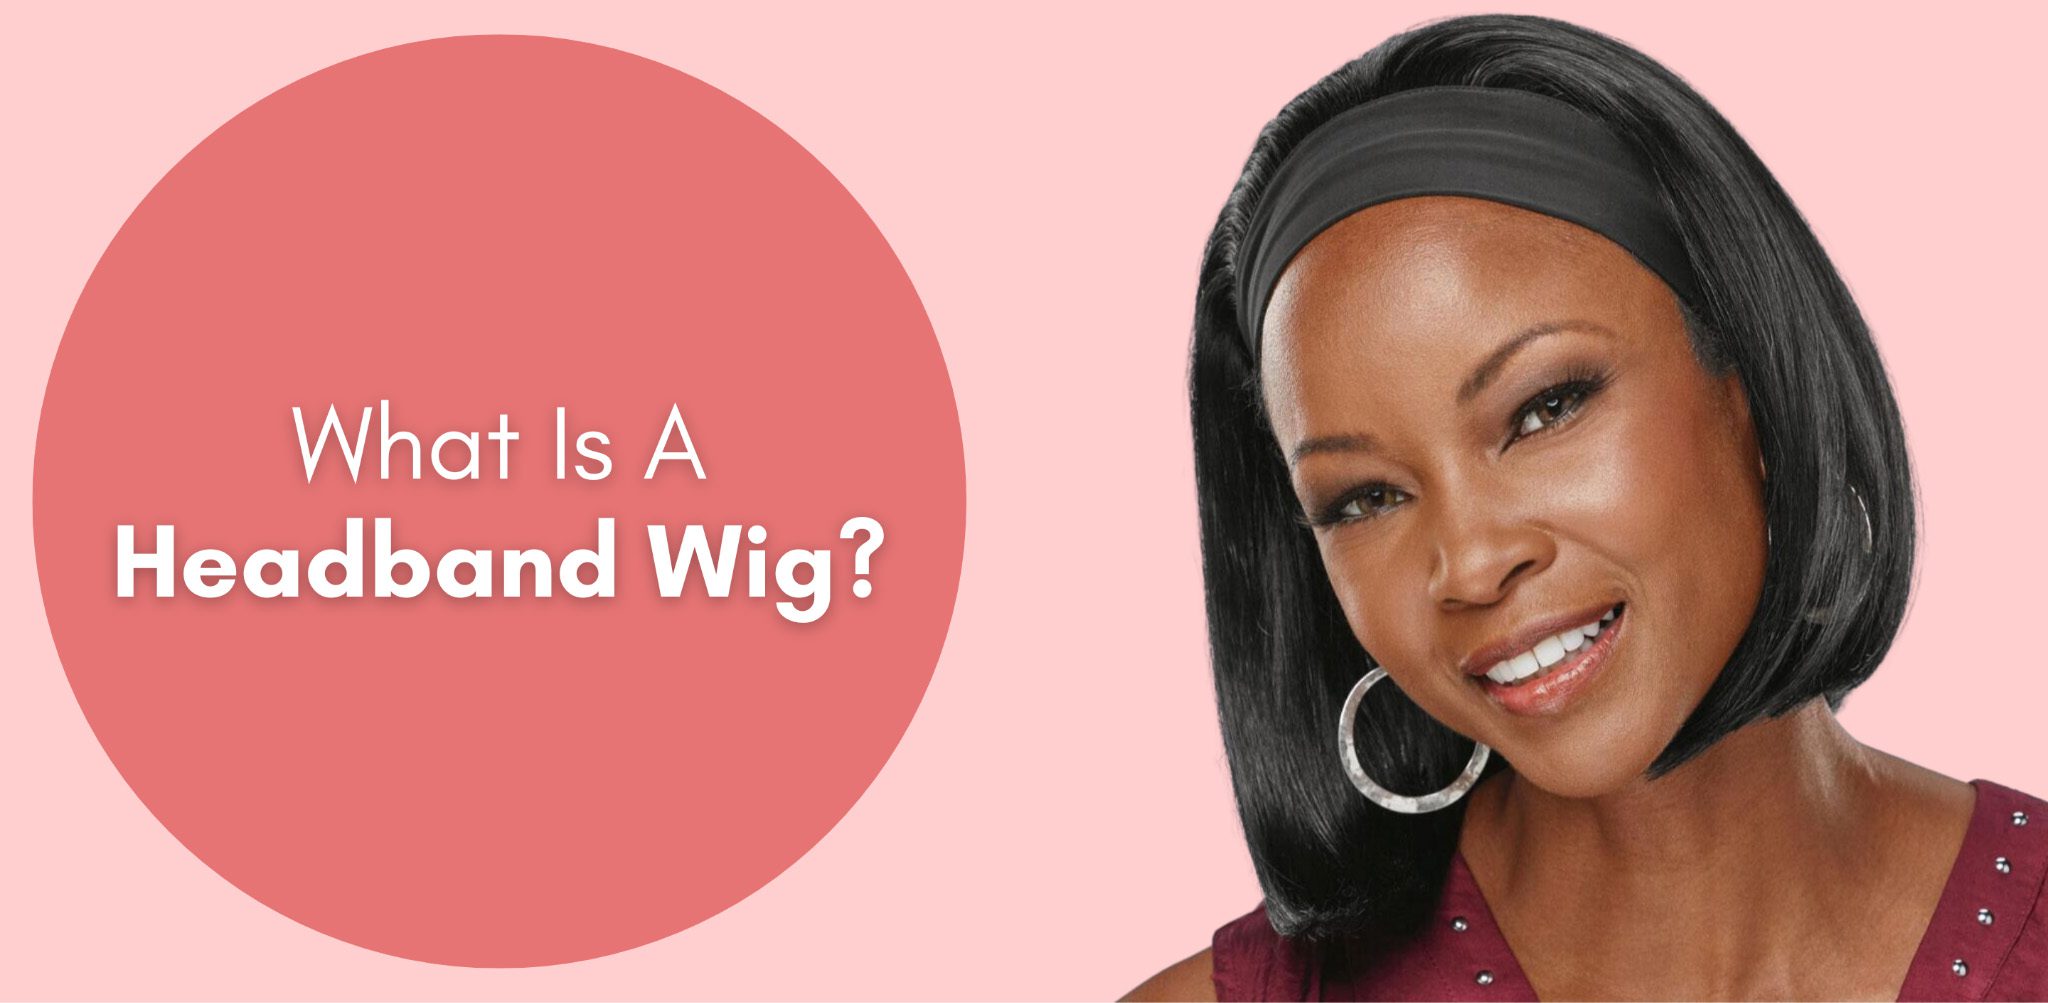 What Is A Headband Wig?